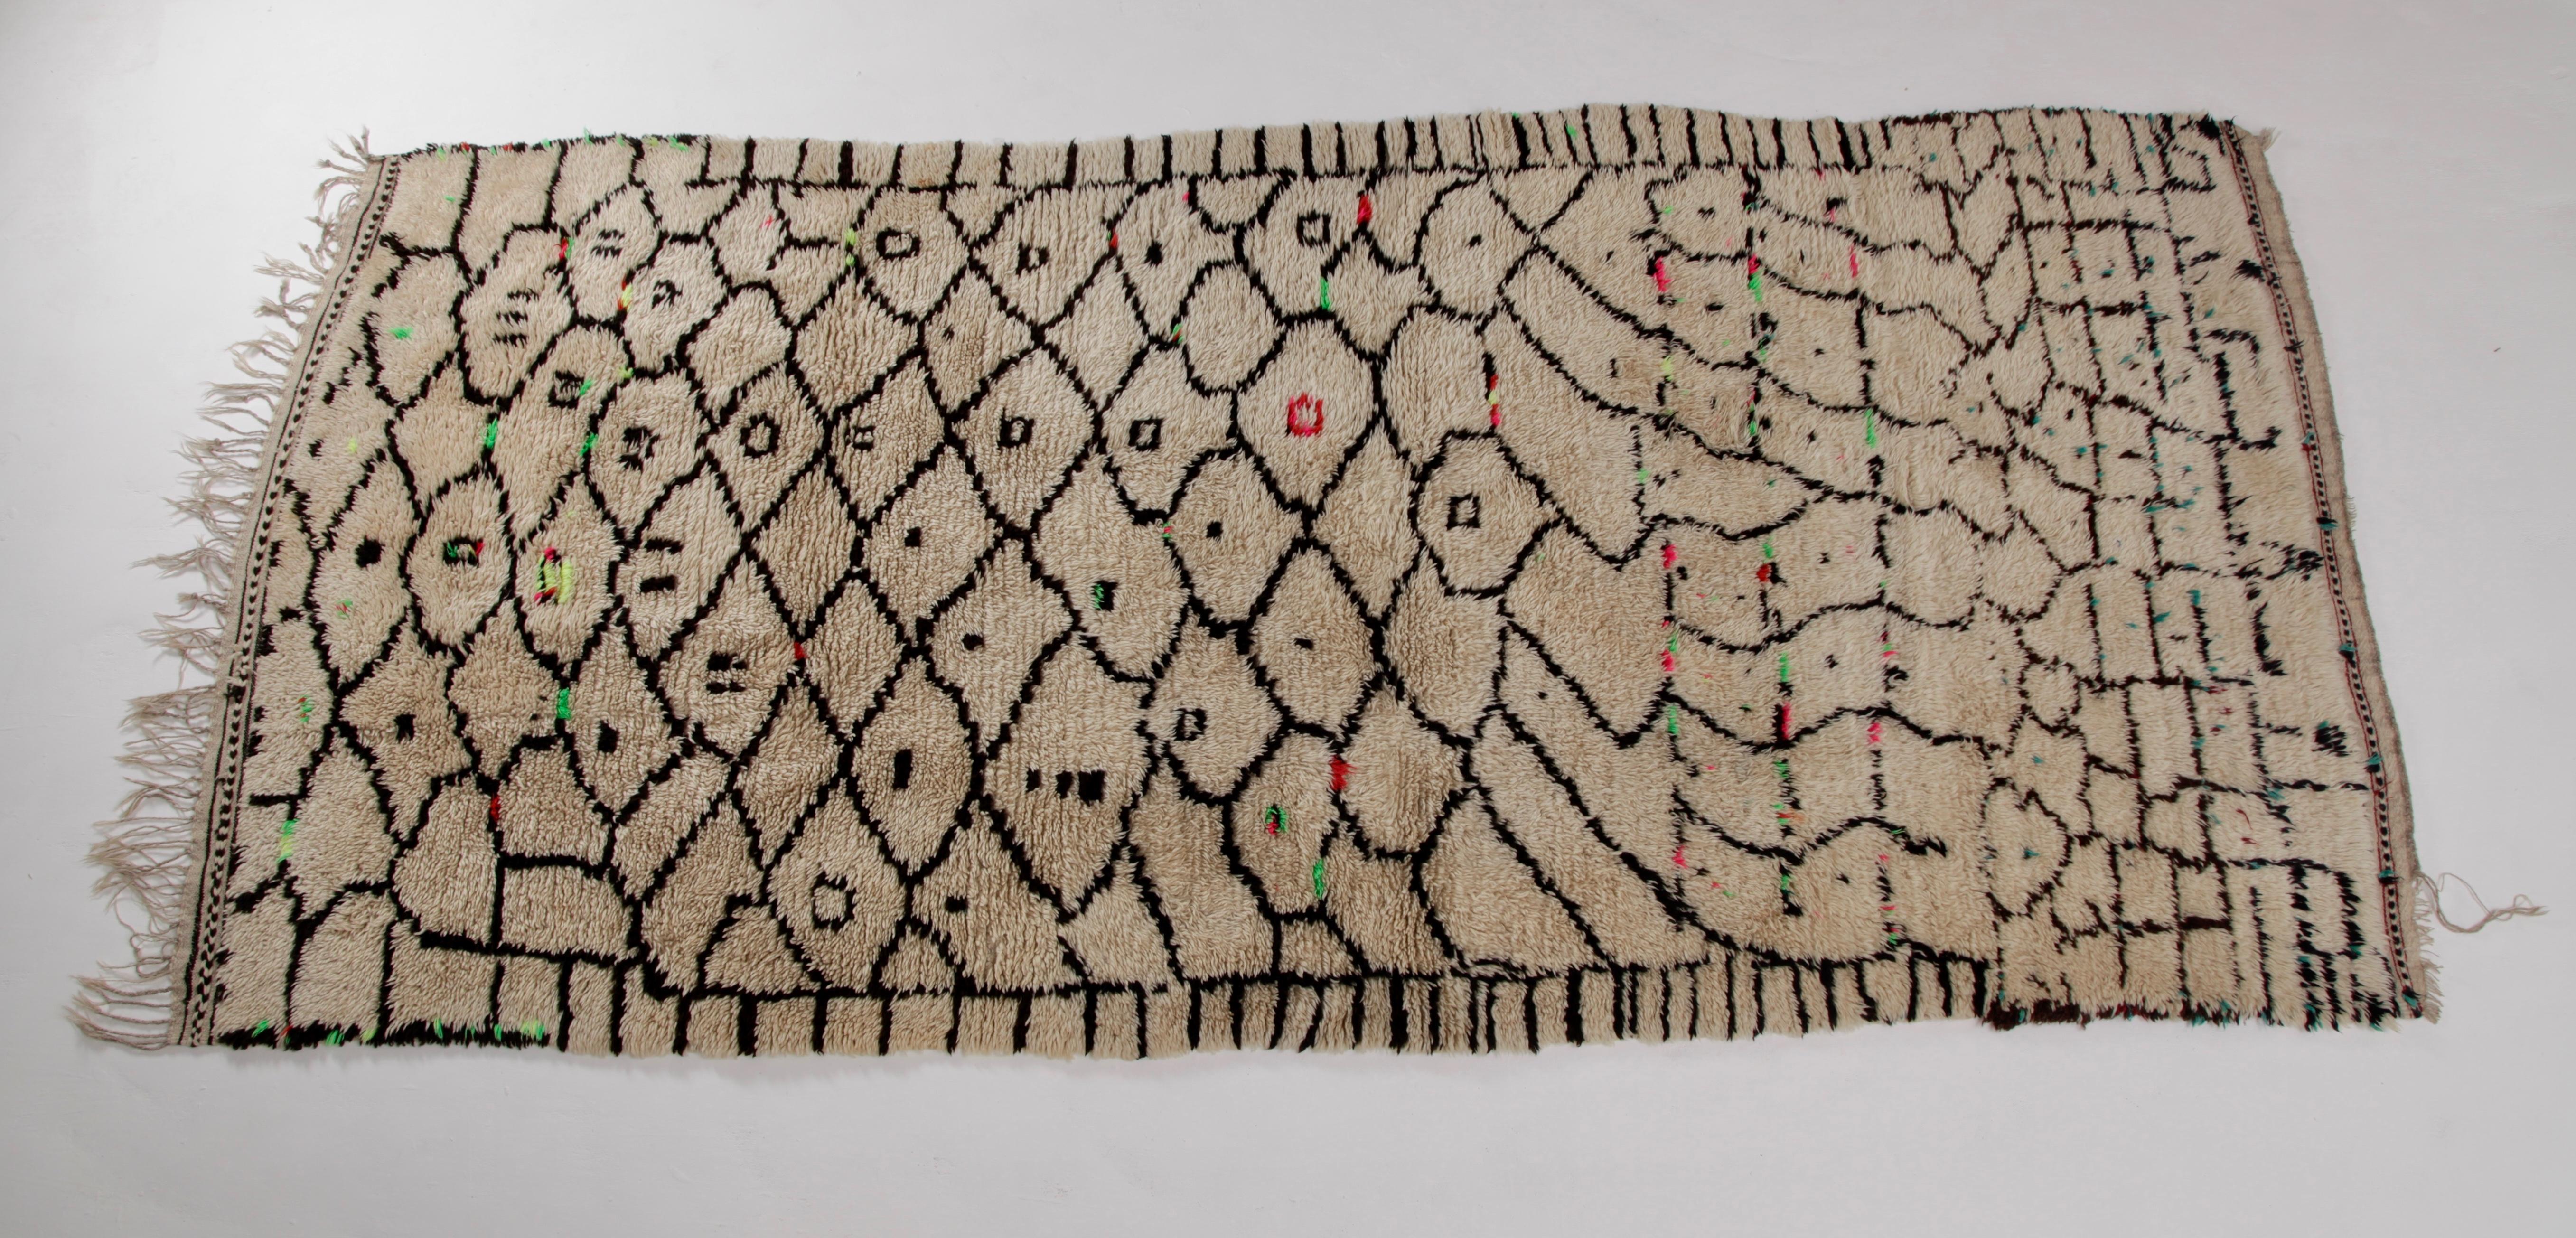 Exceptional vintage tribal Moroccan rug, with neon accents, handmade in Morocco. Approximate dimensions: 300 cm x 150 cm.
 